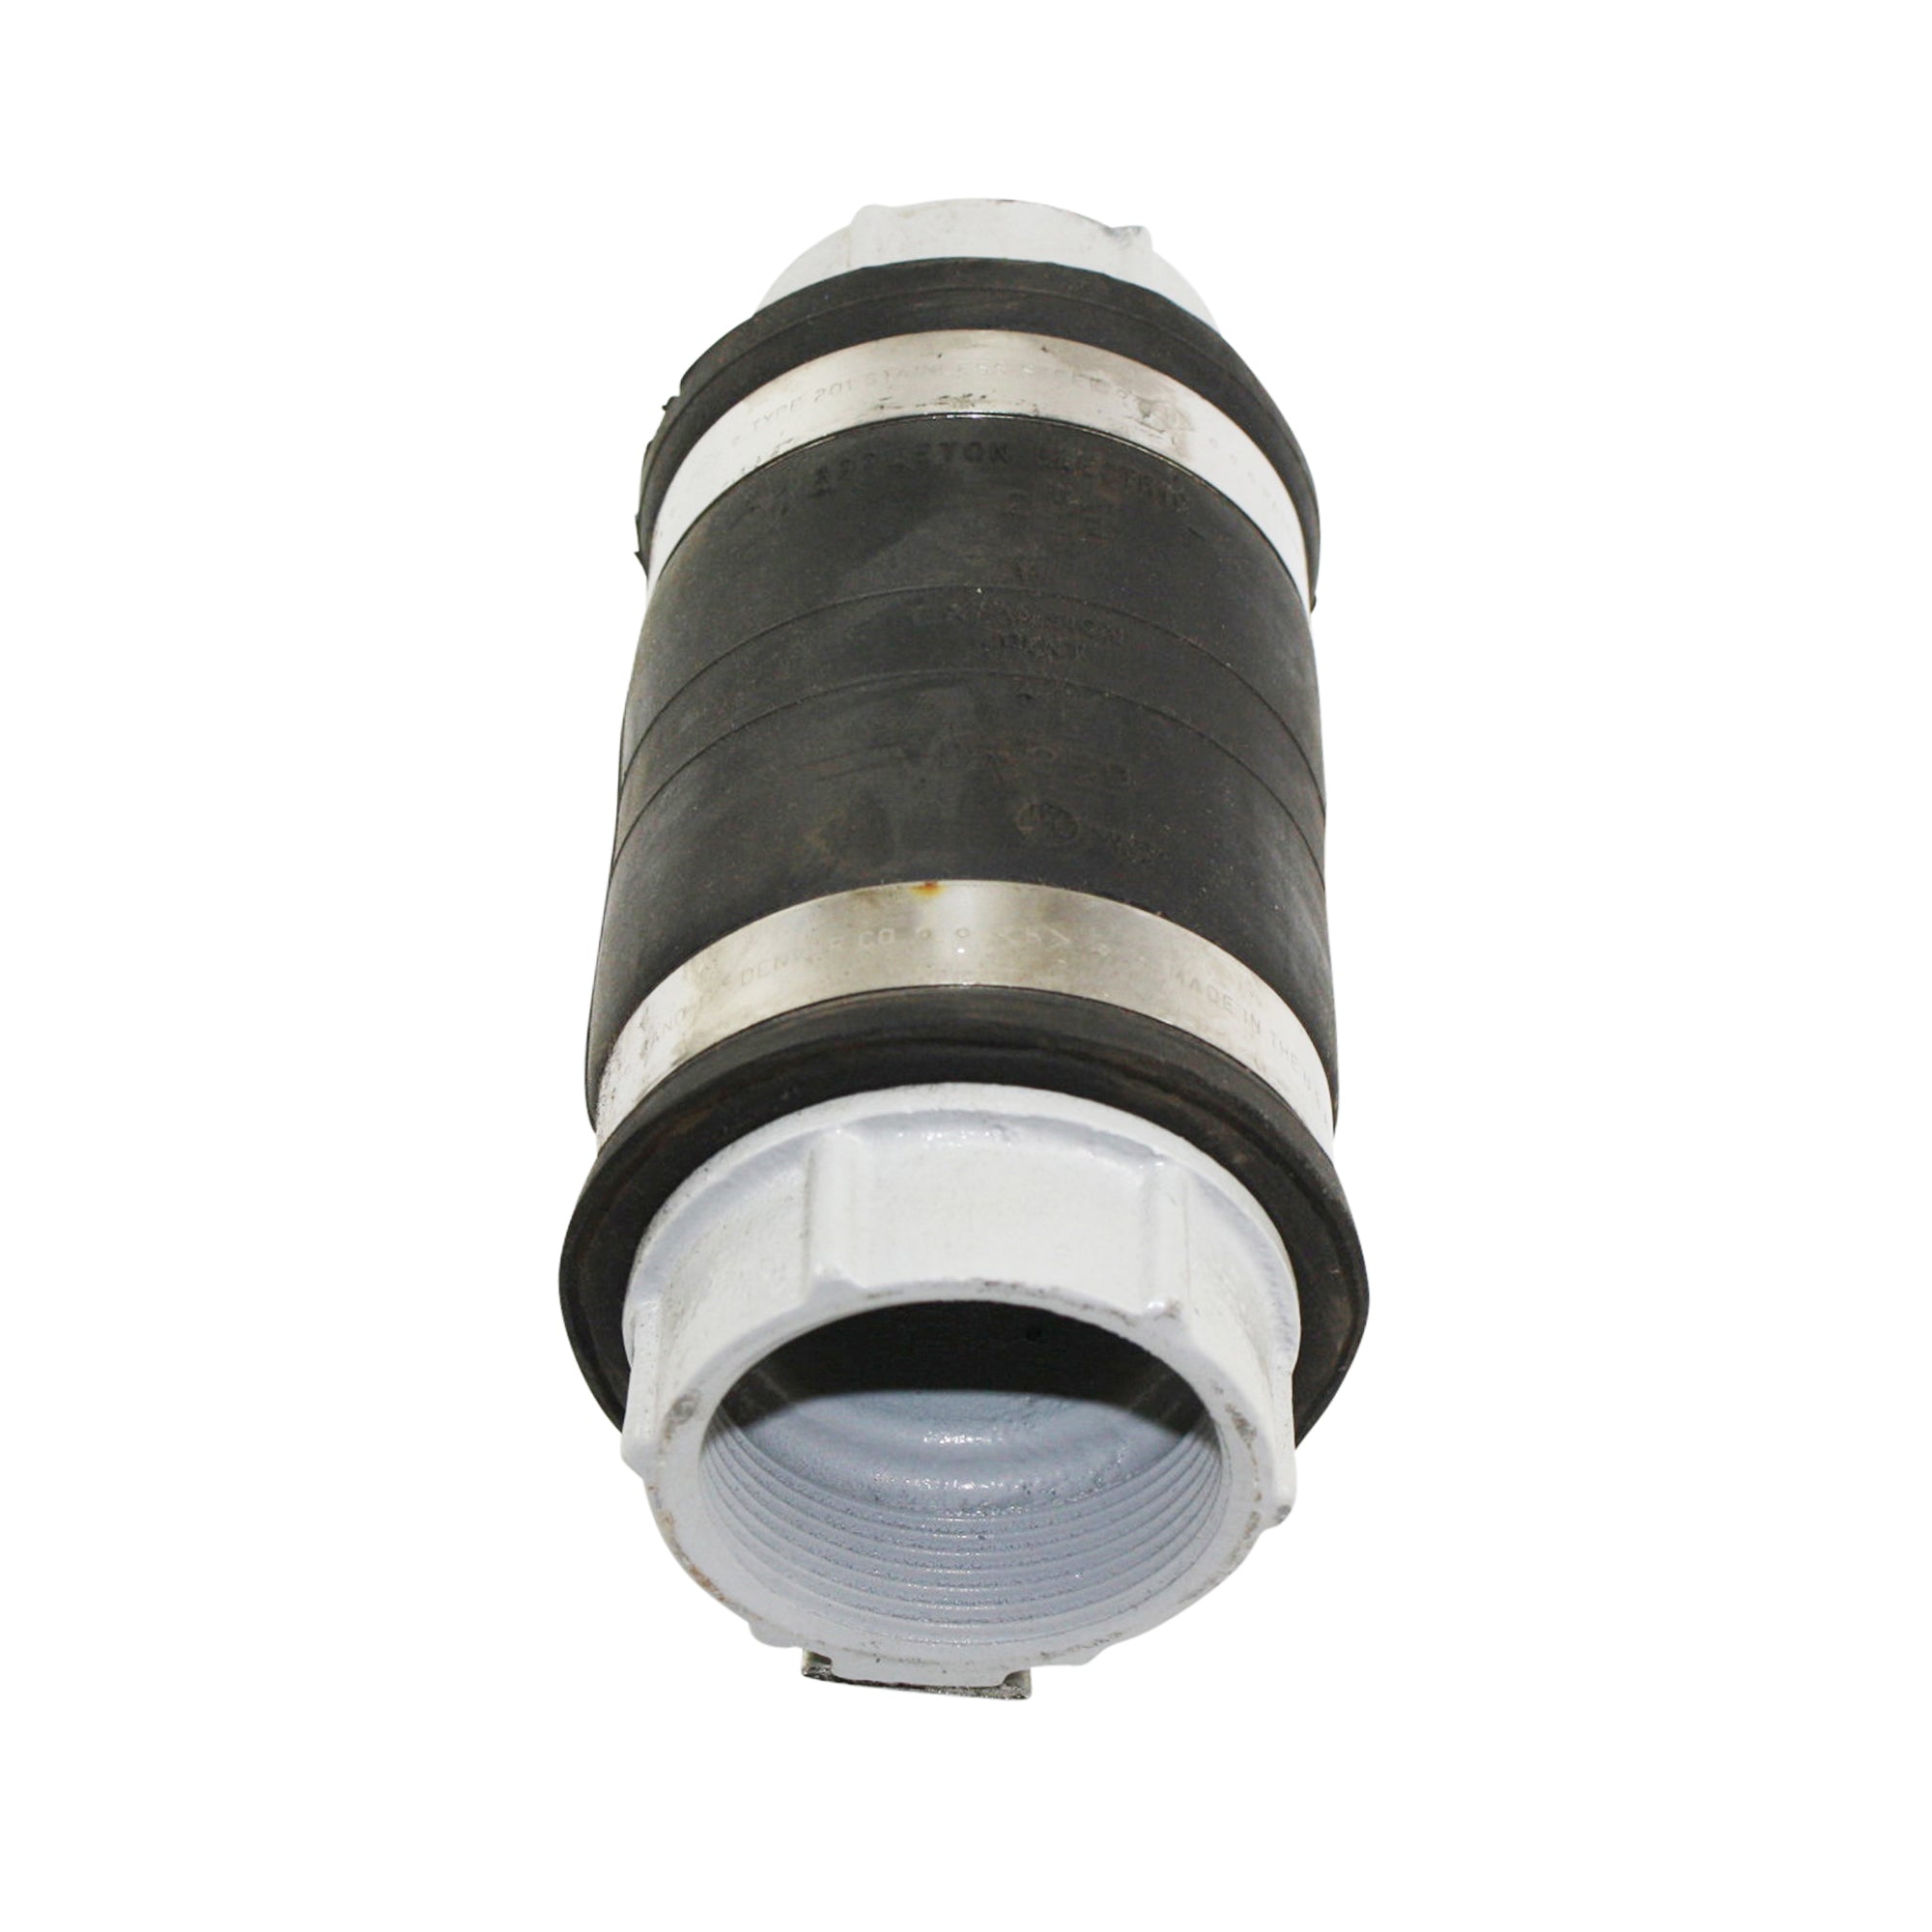 Appleton, APPLETON DF250 EXPANSION AND DEFLECTION COUPLING LIQUID TIGHT 2-1/2"